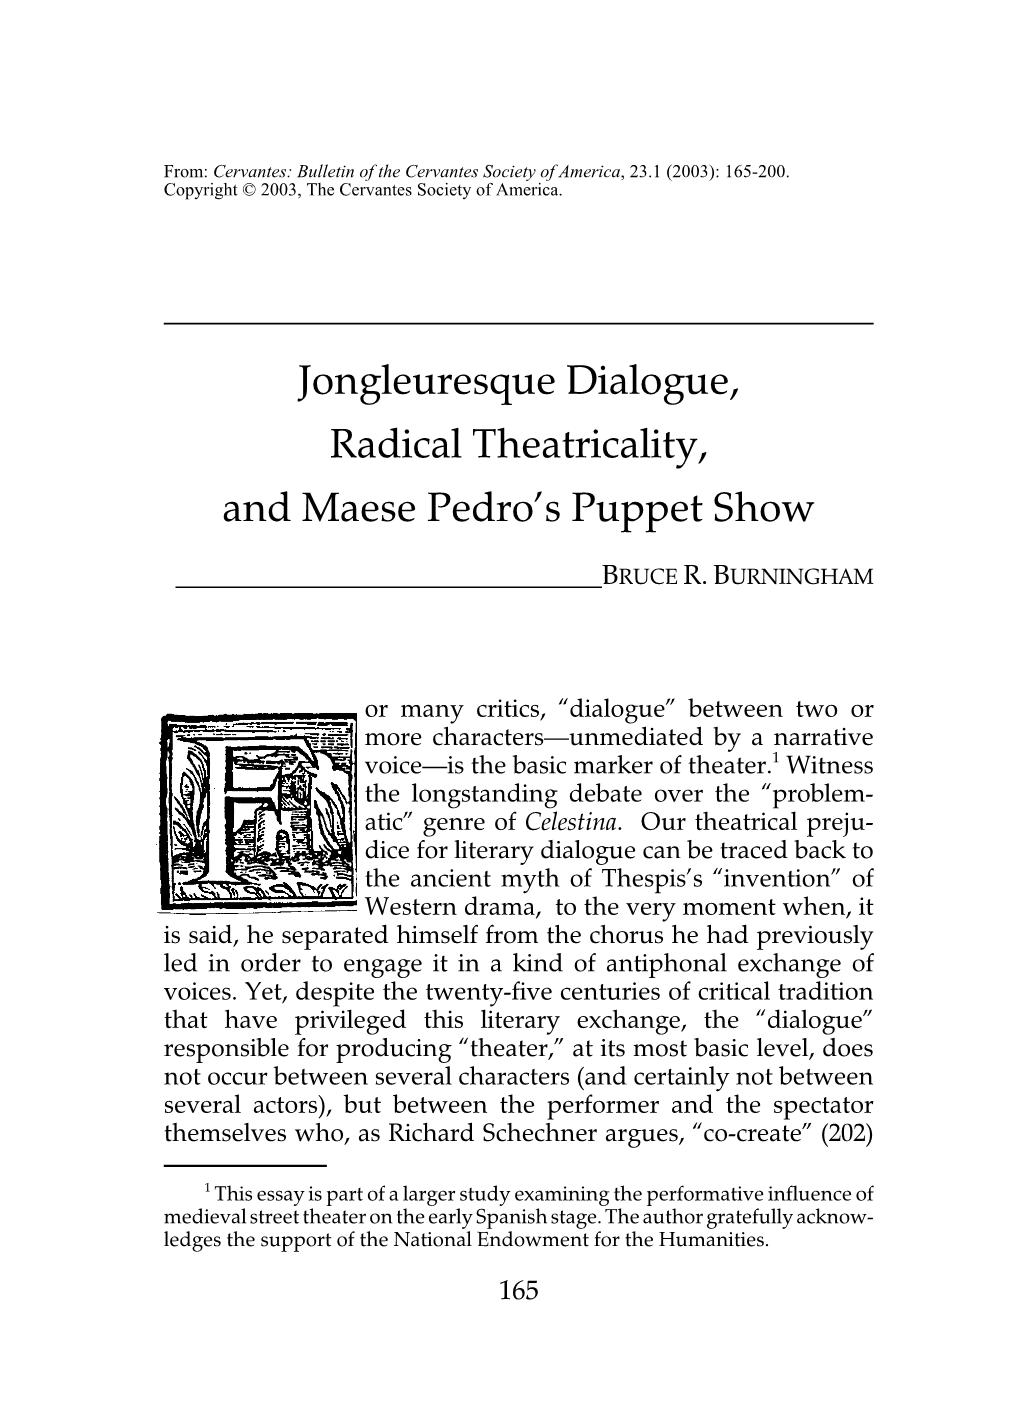 Jongleuresque Dialogue, Radical Theatricality, and Maese Pedro's